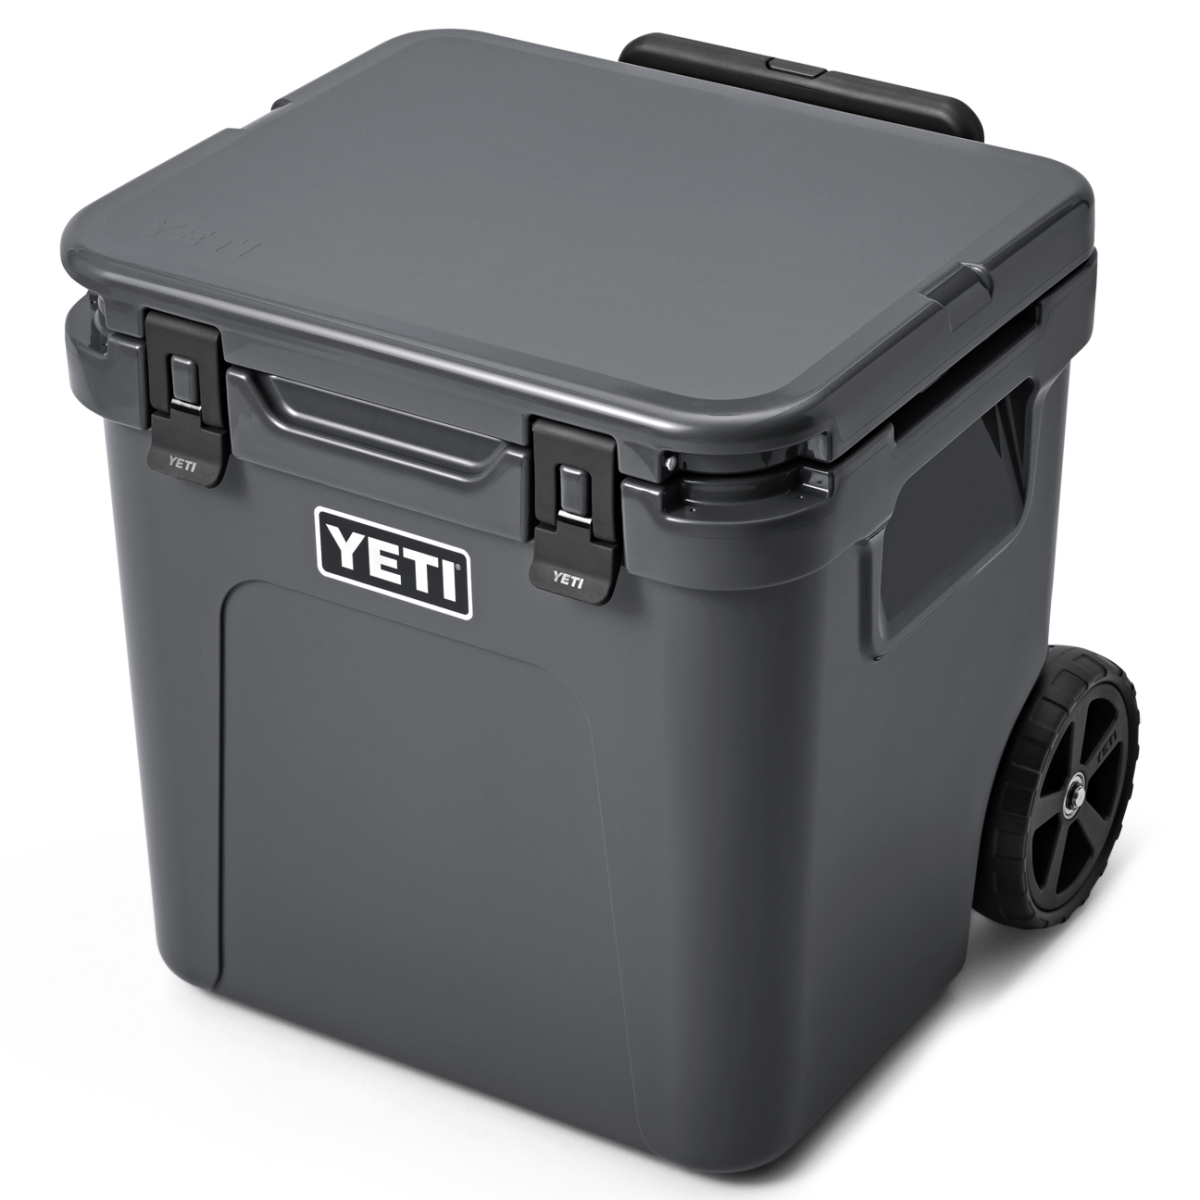 YETI Roadie 48 Wheeled Cooler Review: Convenient, Portable Rolling Cooler